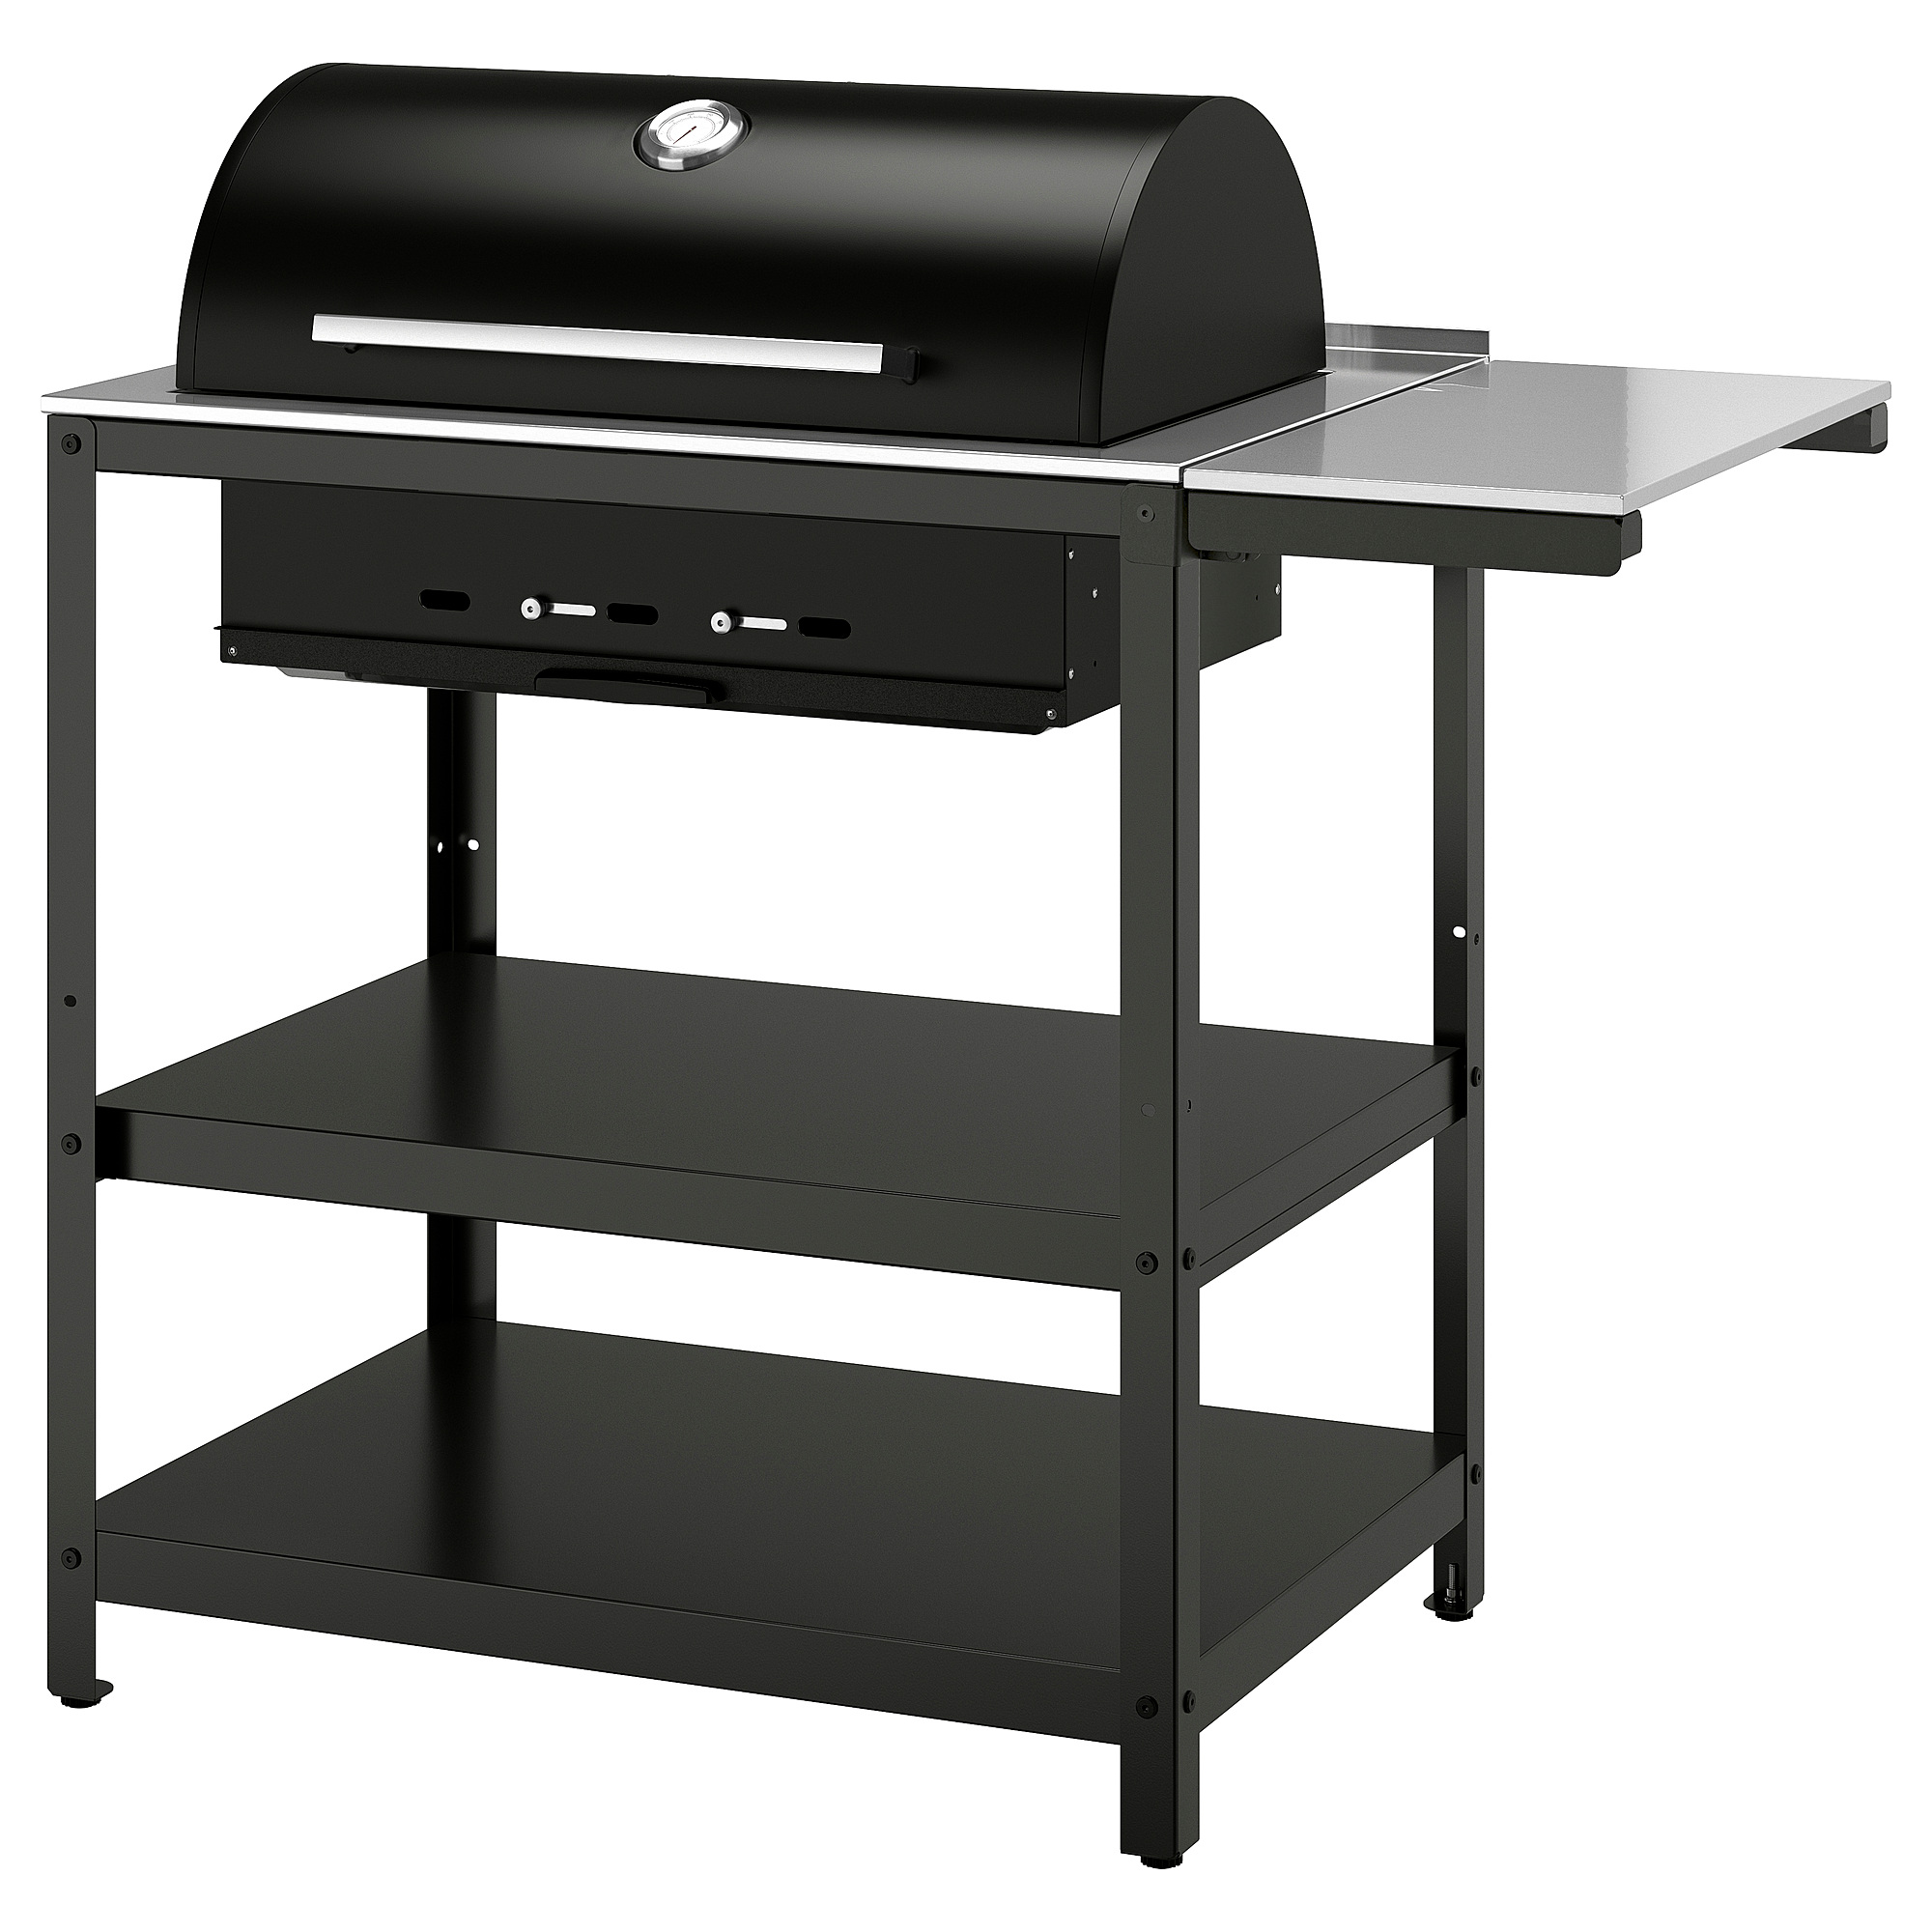 GRILLSKÄR charcoal barbecue w side table